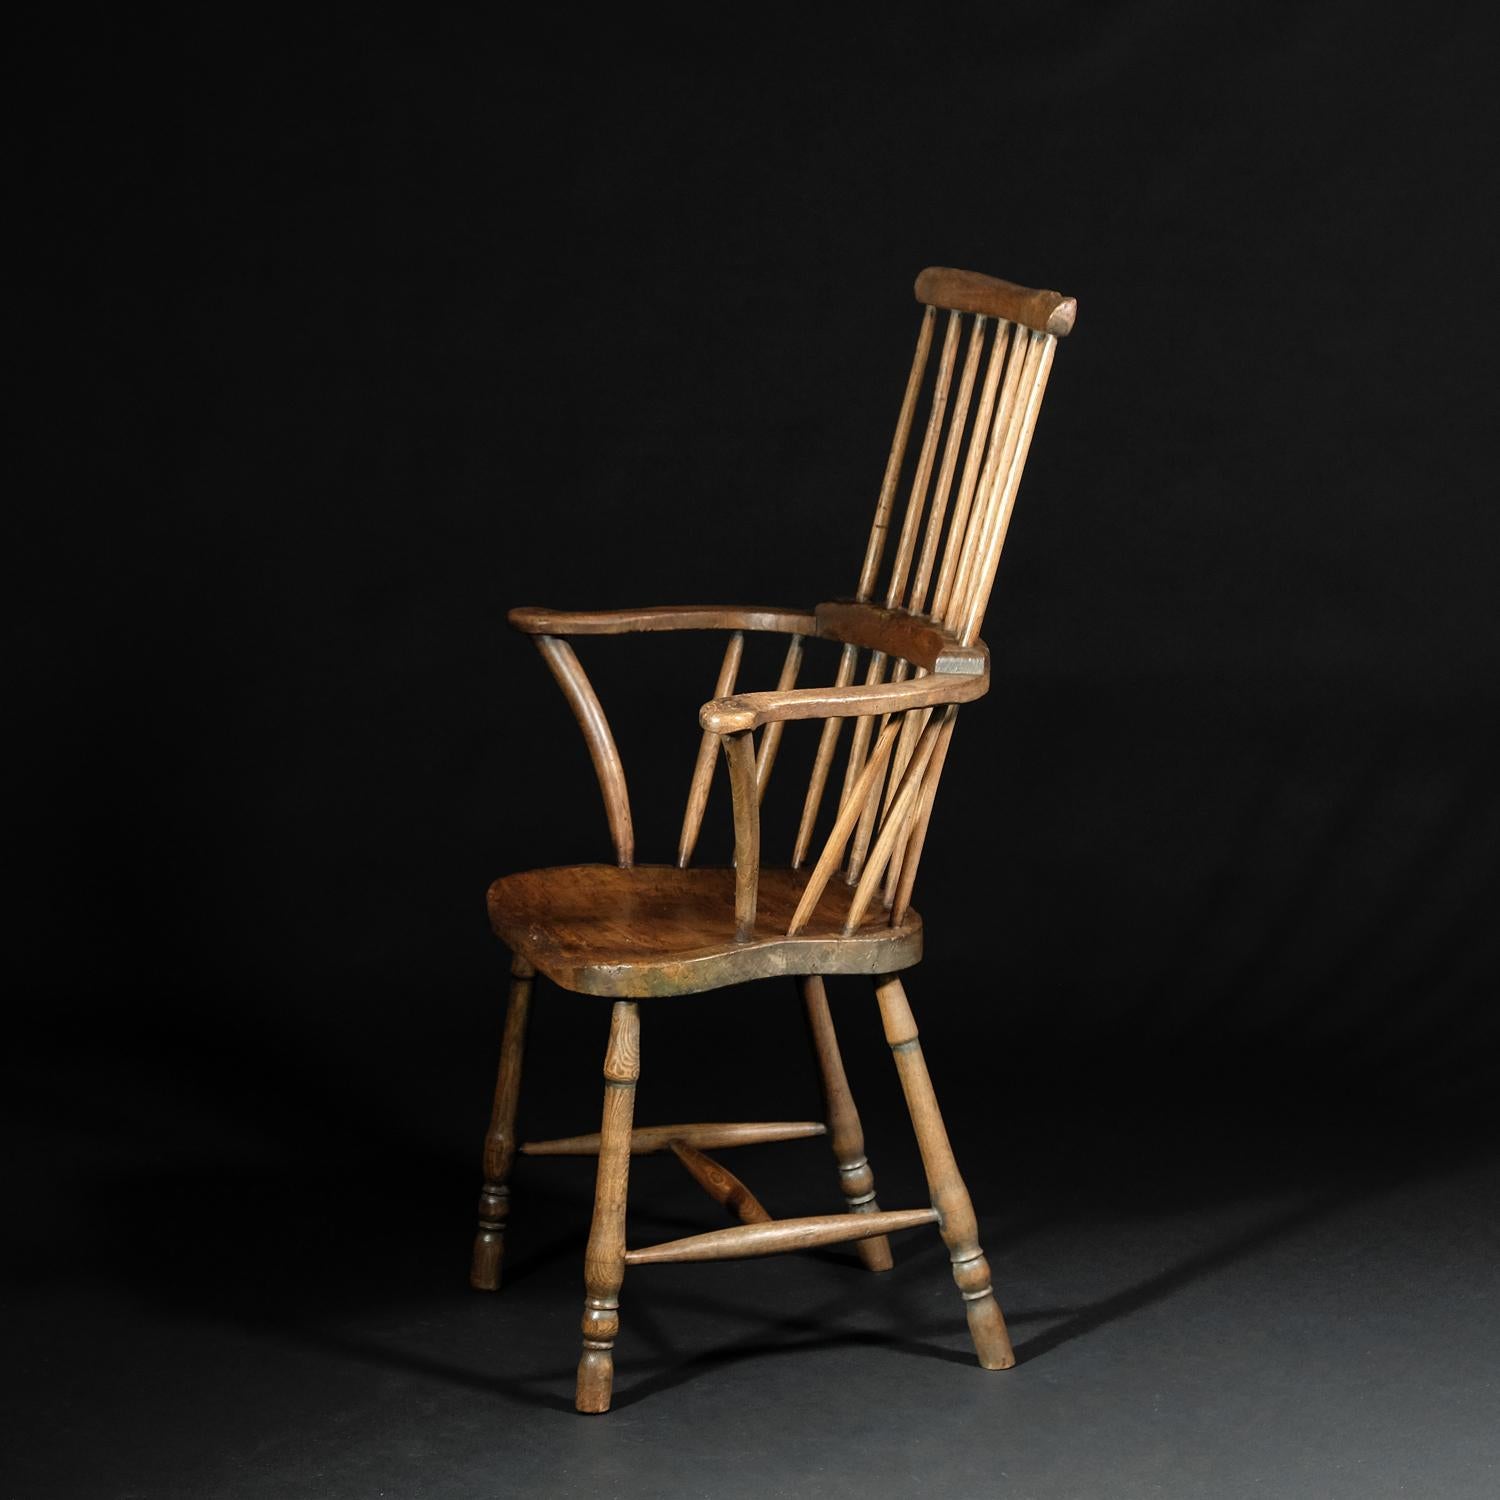 Hand-Carved 18th Century English West Country Comb Back Windsor Chair, Primitive Rustic, Elm